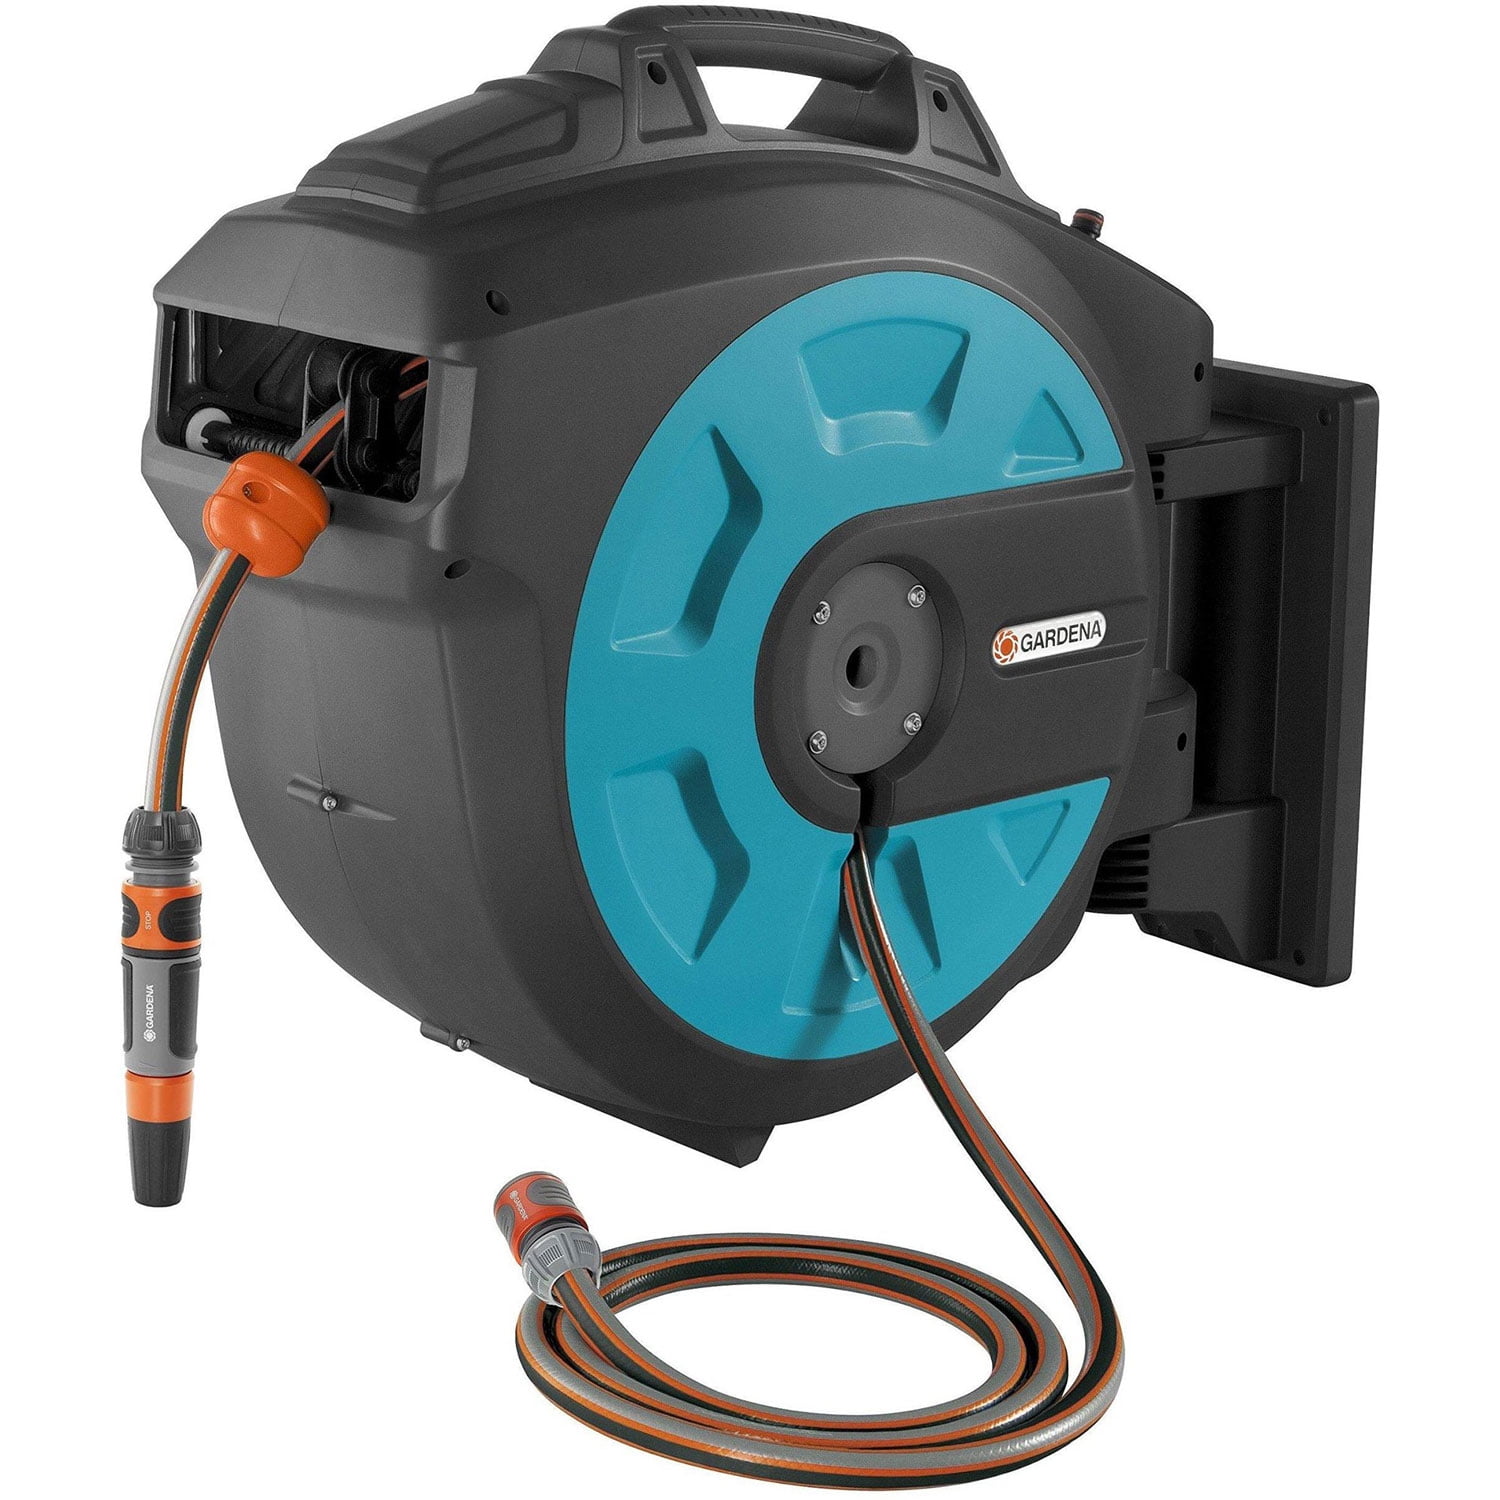 Blue G GOOD GAIN Retractable Garden Hose Reel Wall Mounted 1/2 x 82 ft Hose Winder with Any Length Lock 